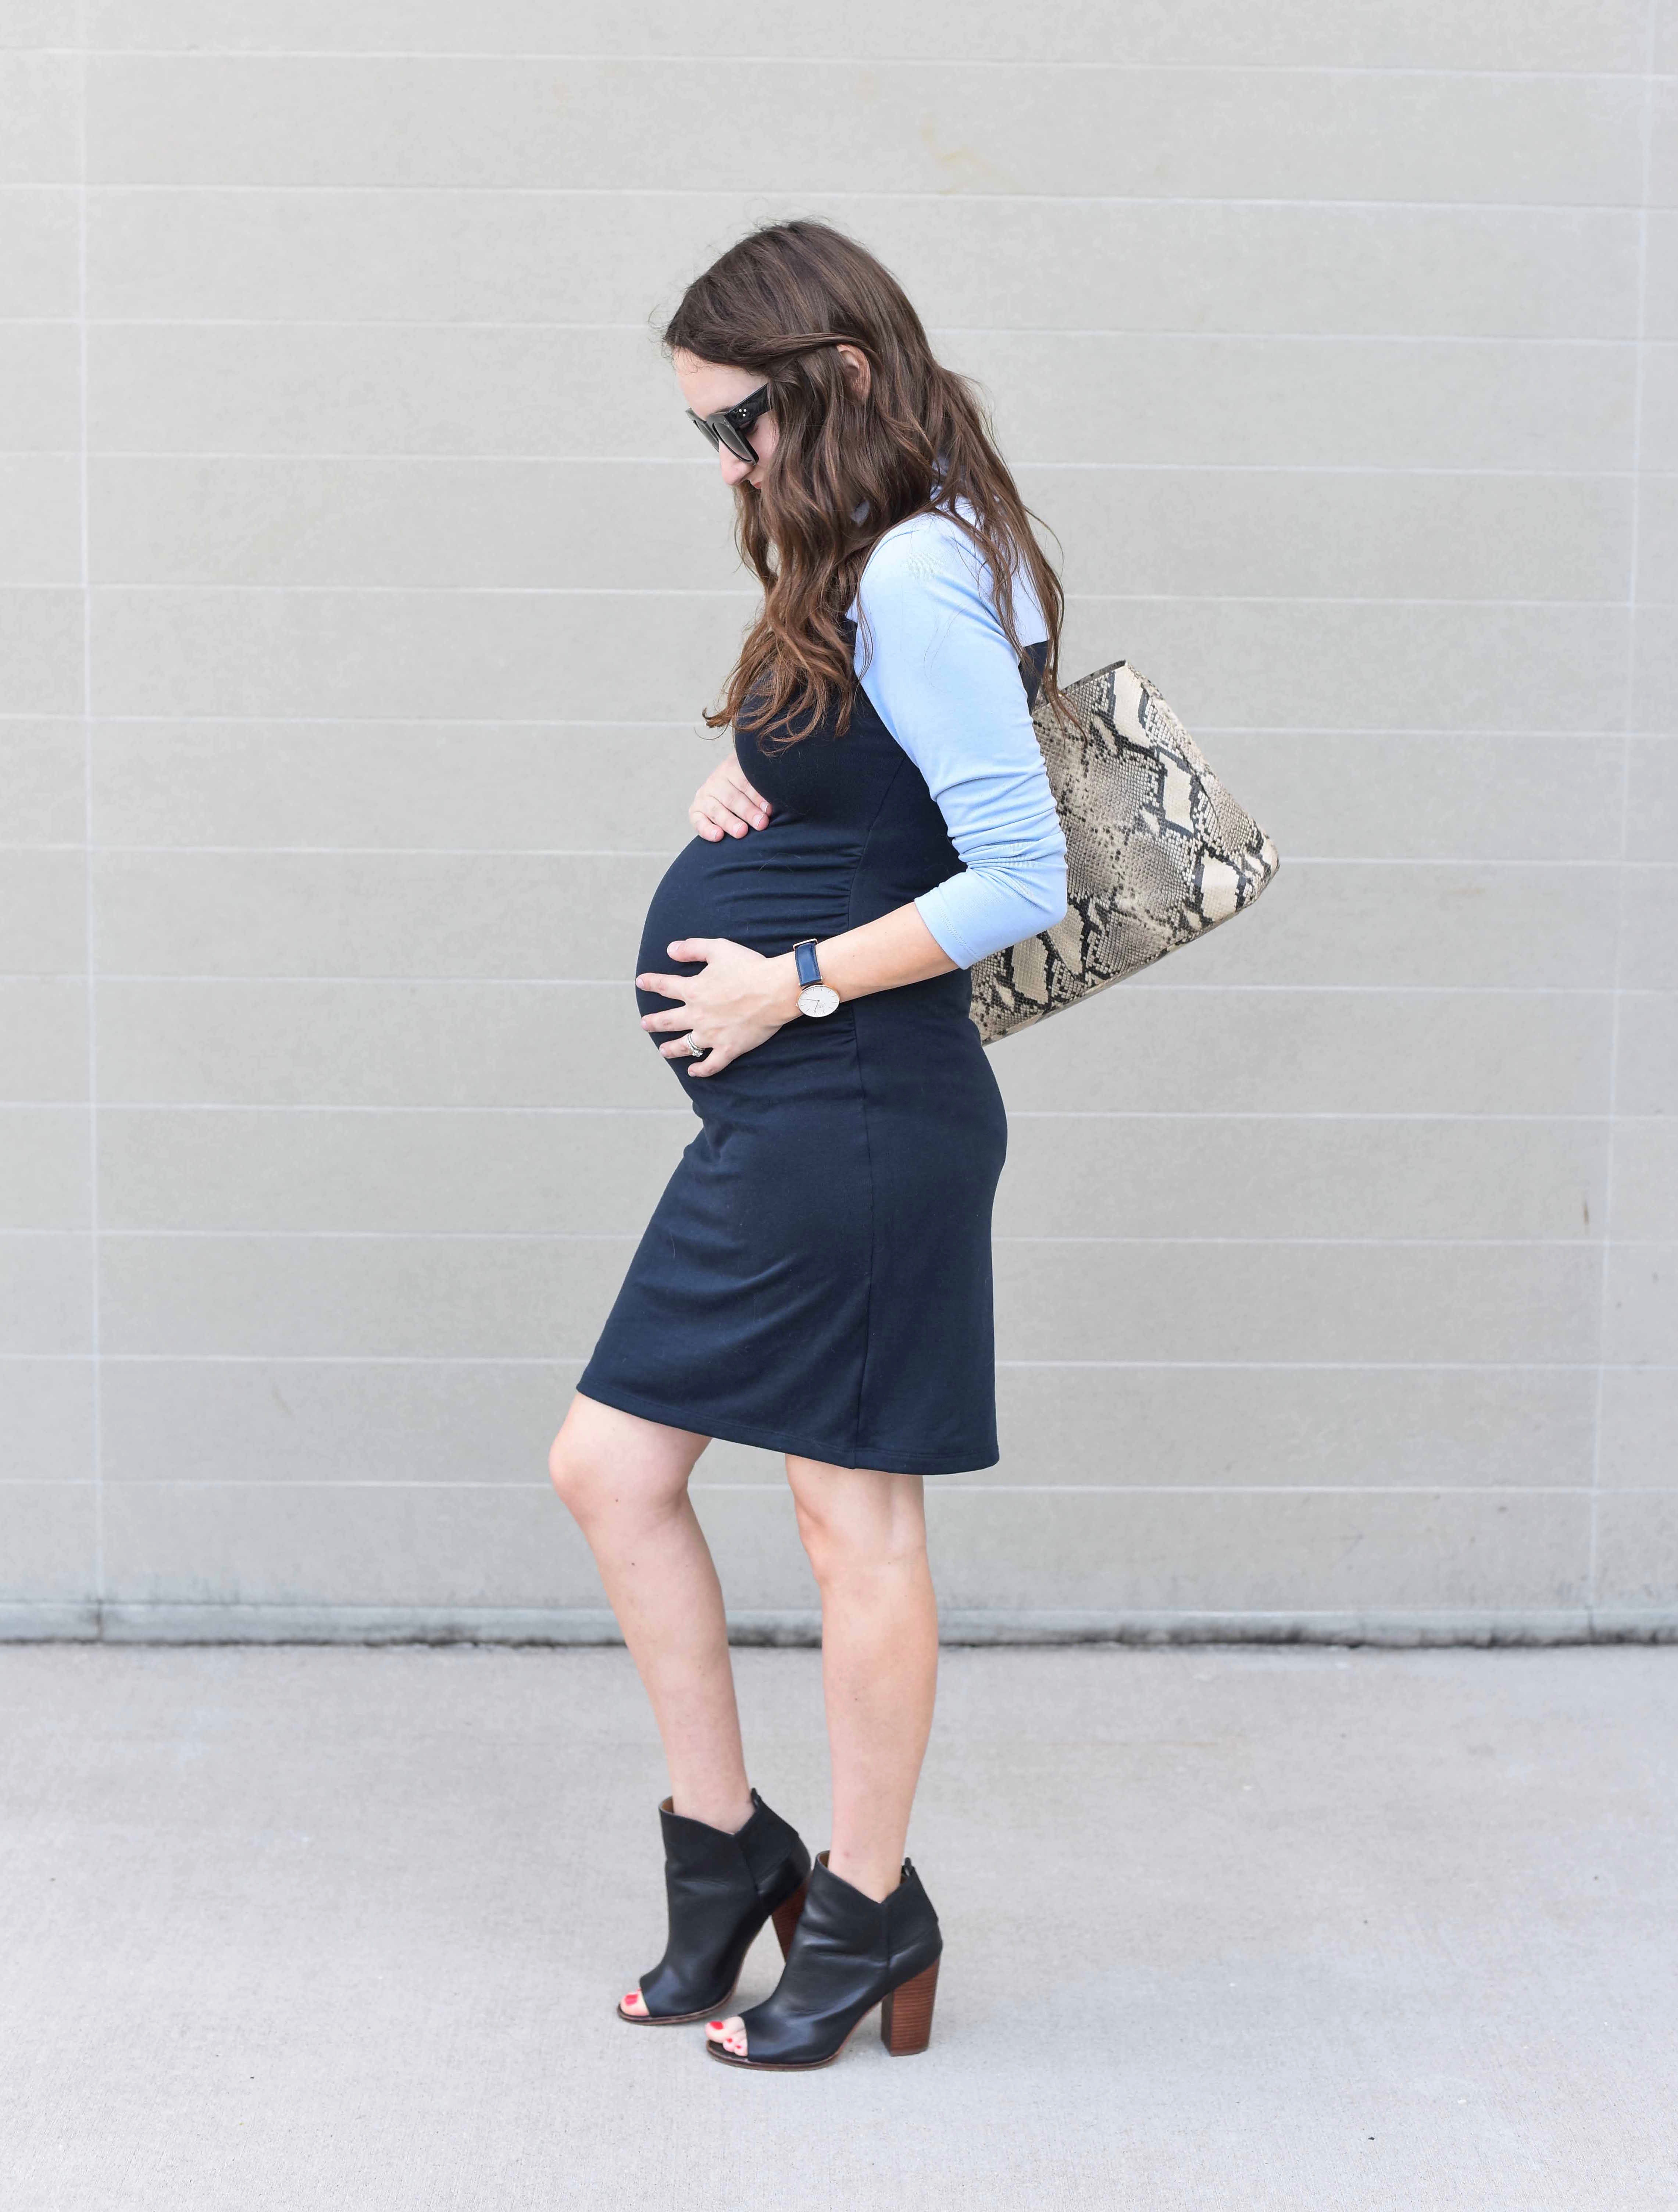 Lone Star Looking Glass, a Texas fashion blow, styles a blue colorblocked maternity dress from Stowaway at 28 weeks pregnant.